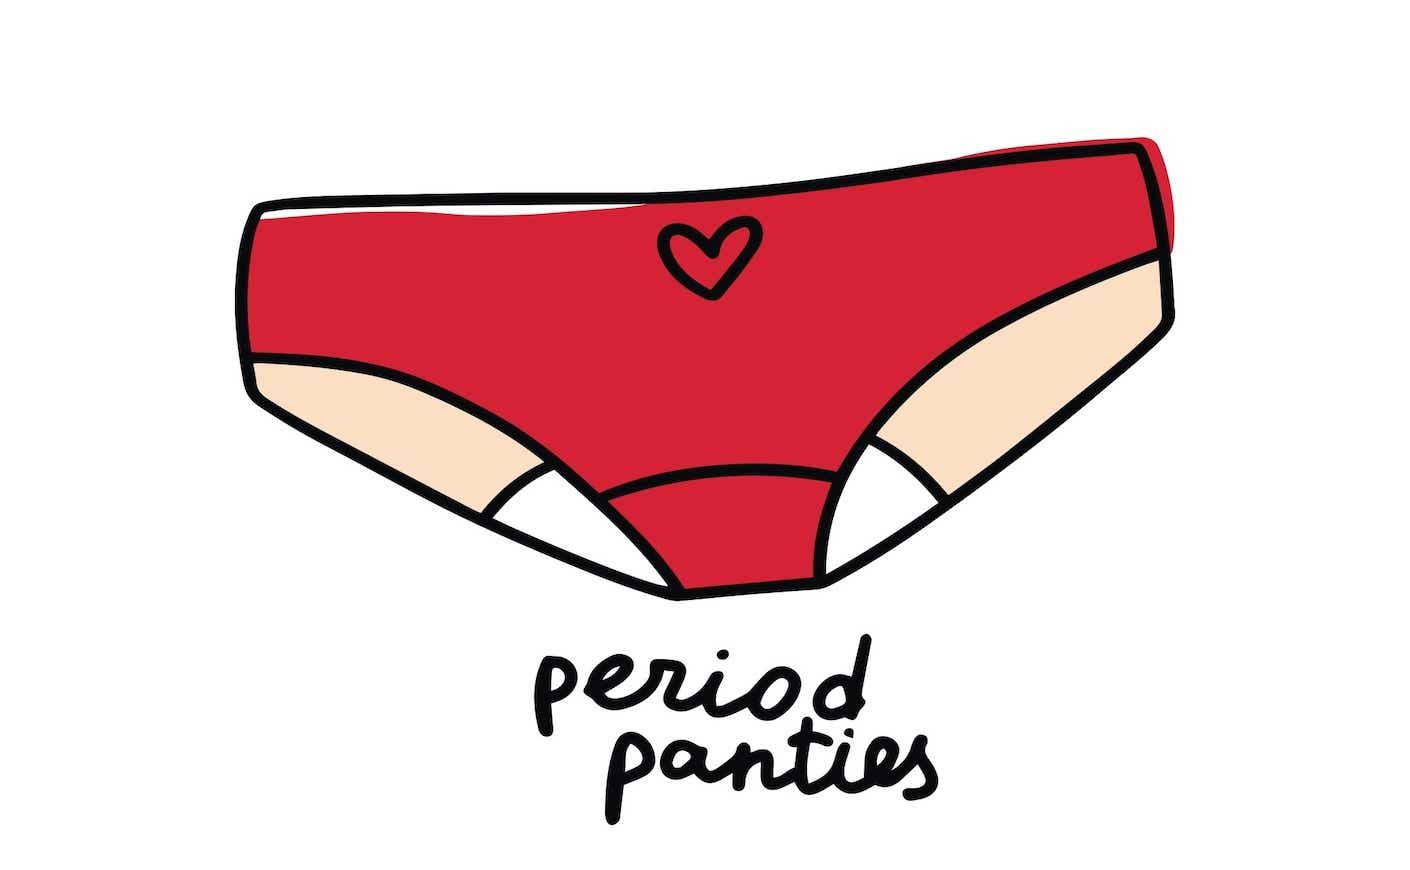 Leak-proof panties are about to change the underwear game forever